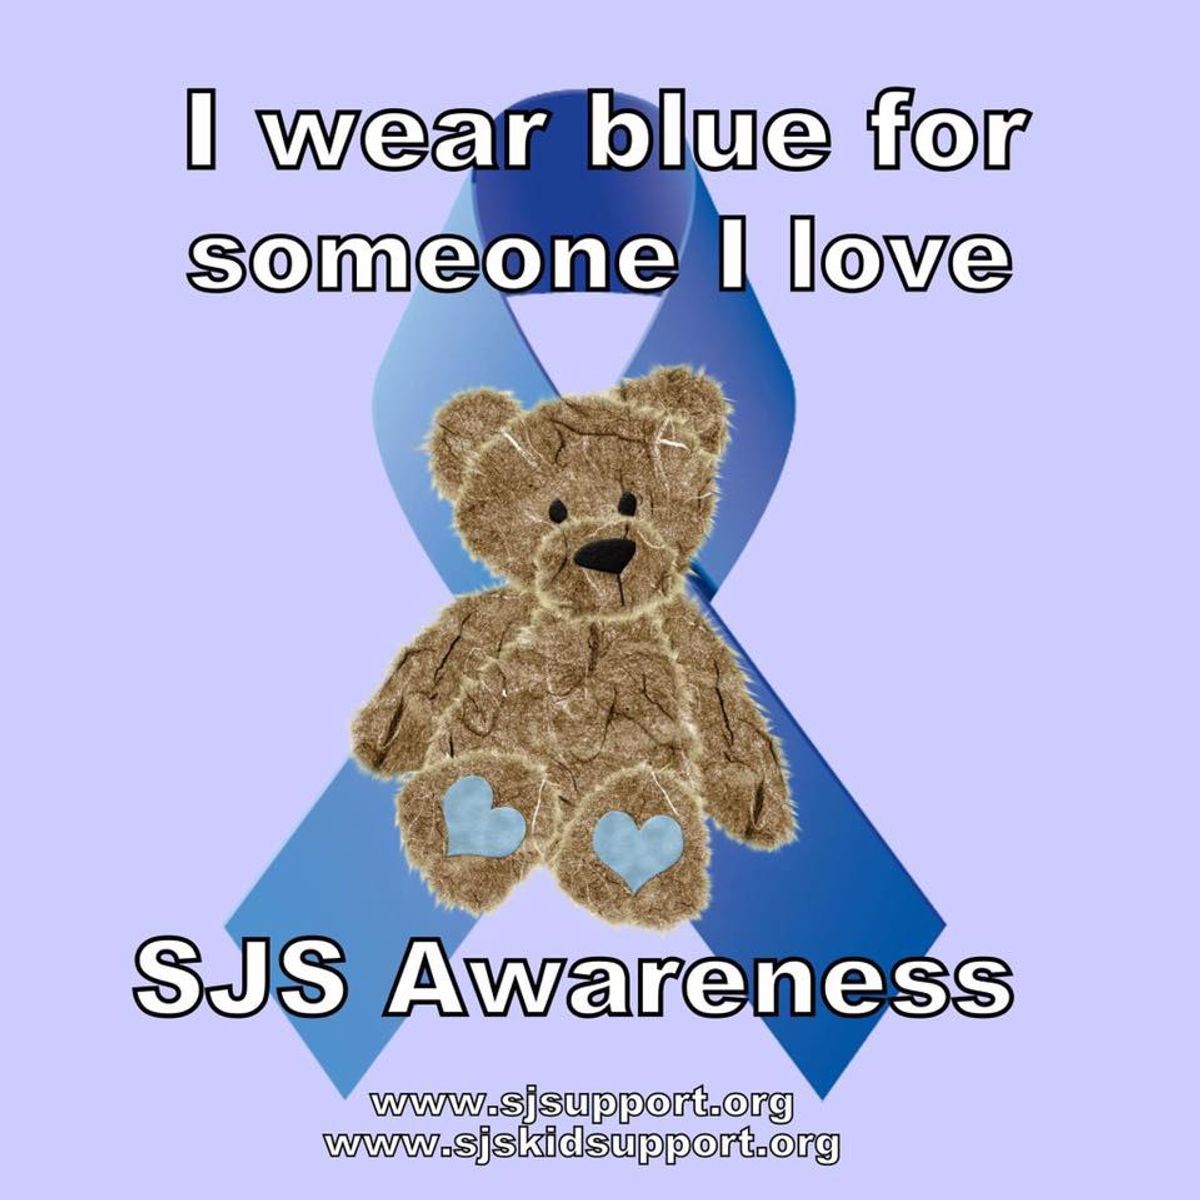 The Month Of August: Stevens Johnson Syndrome Awareness Month